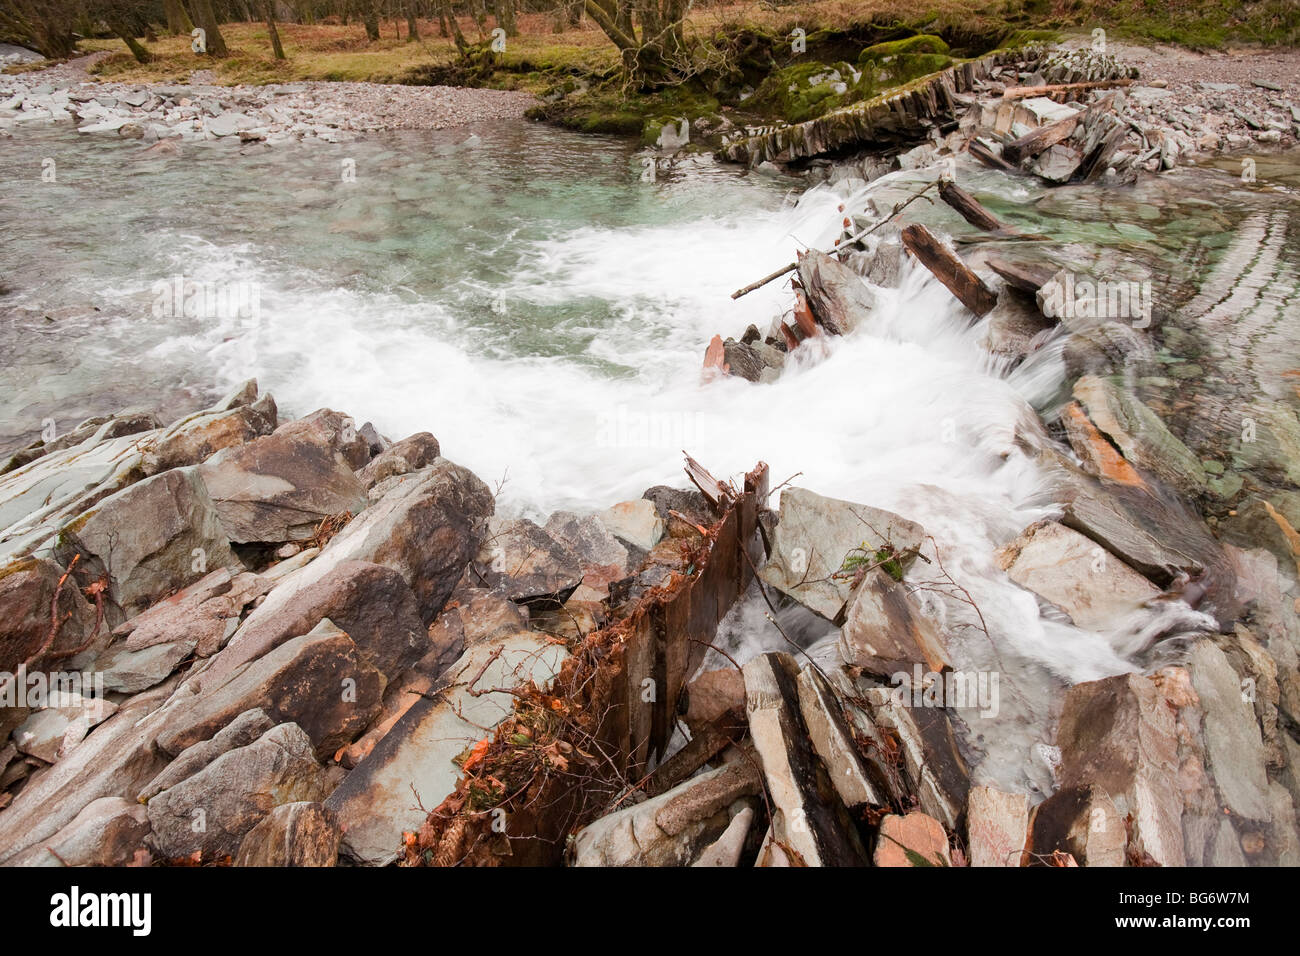 A weir on the River Brathay at Elterwater in the Lake District, that was destroyed by the floods that devastated Cumbria in 2009 Stock Photo